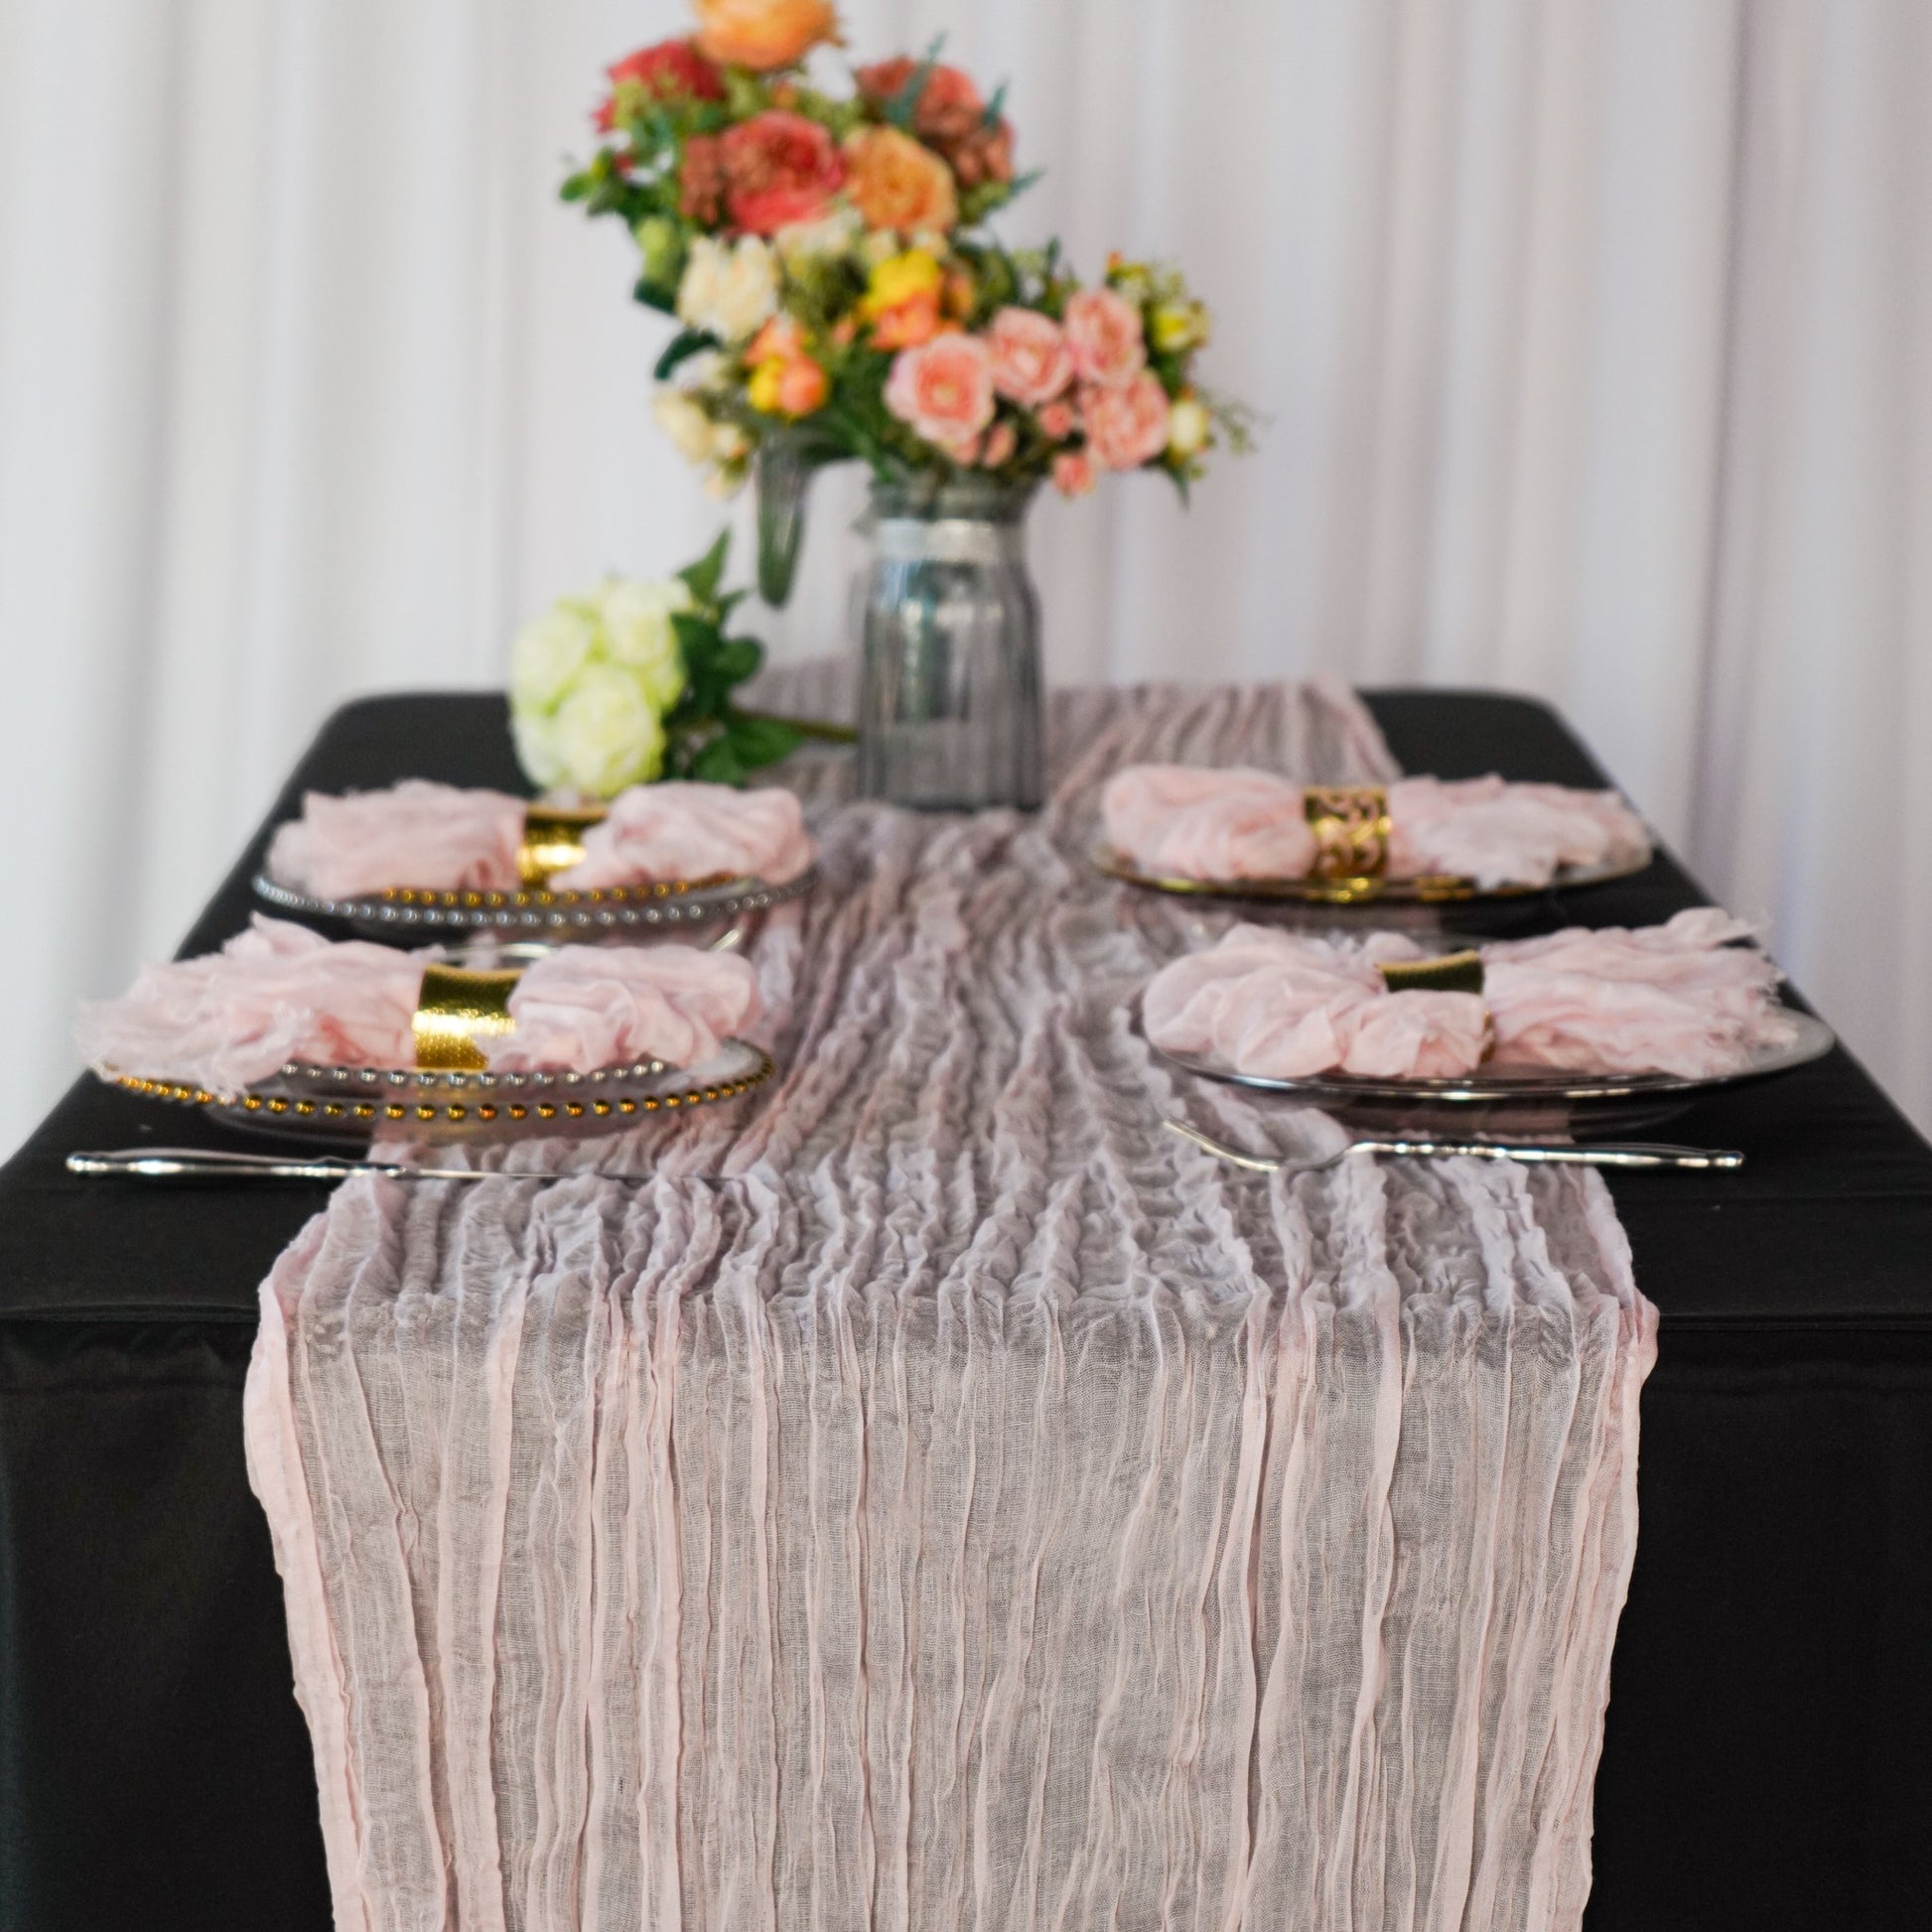 Premium Cheesecloth Table Runner 16FT x 25" - Blush/Rose Gold